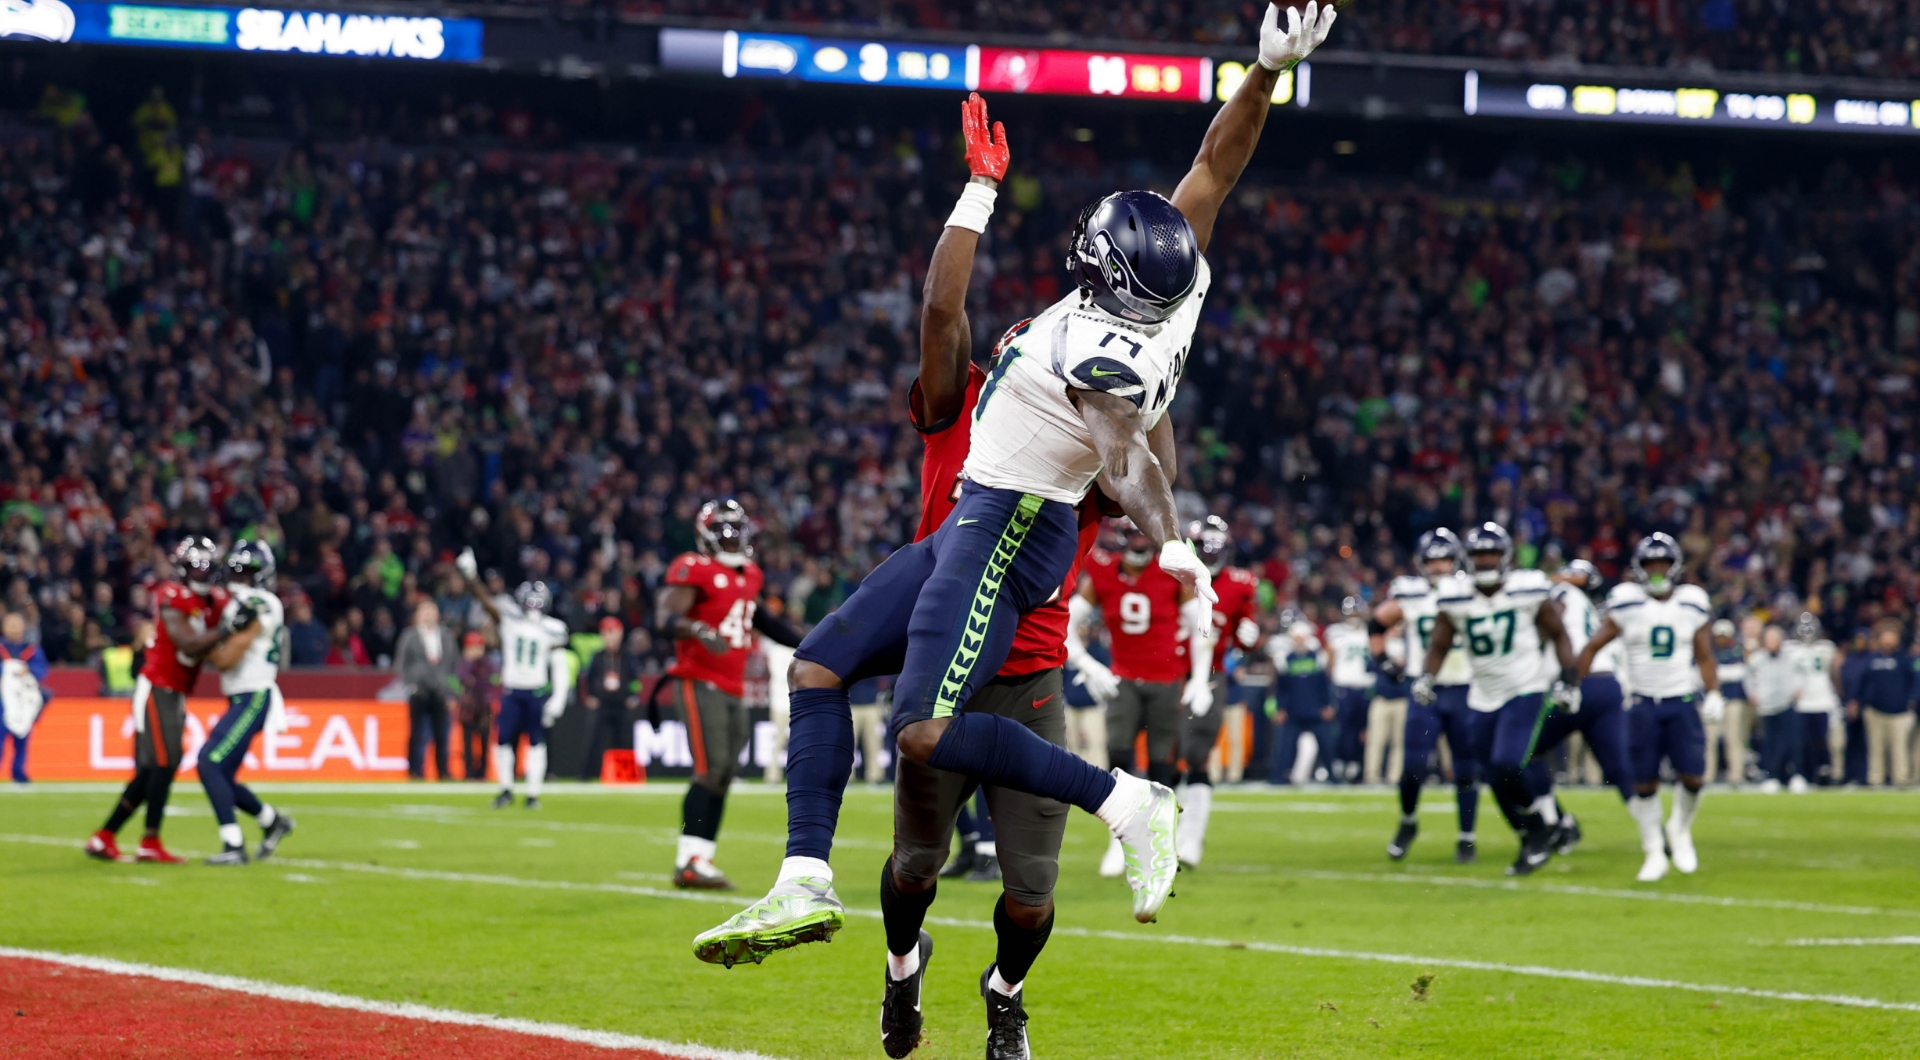 DK Metcalf's Seattle Seahawks favored in our Raiders vs Seahawks picks and odds